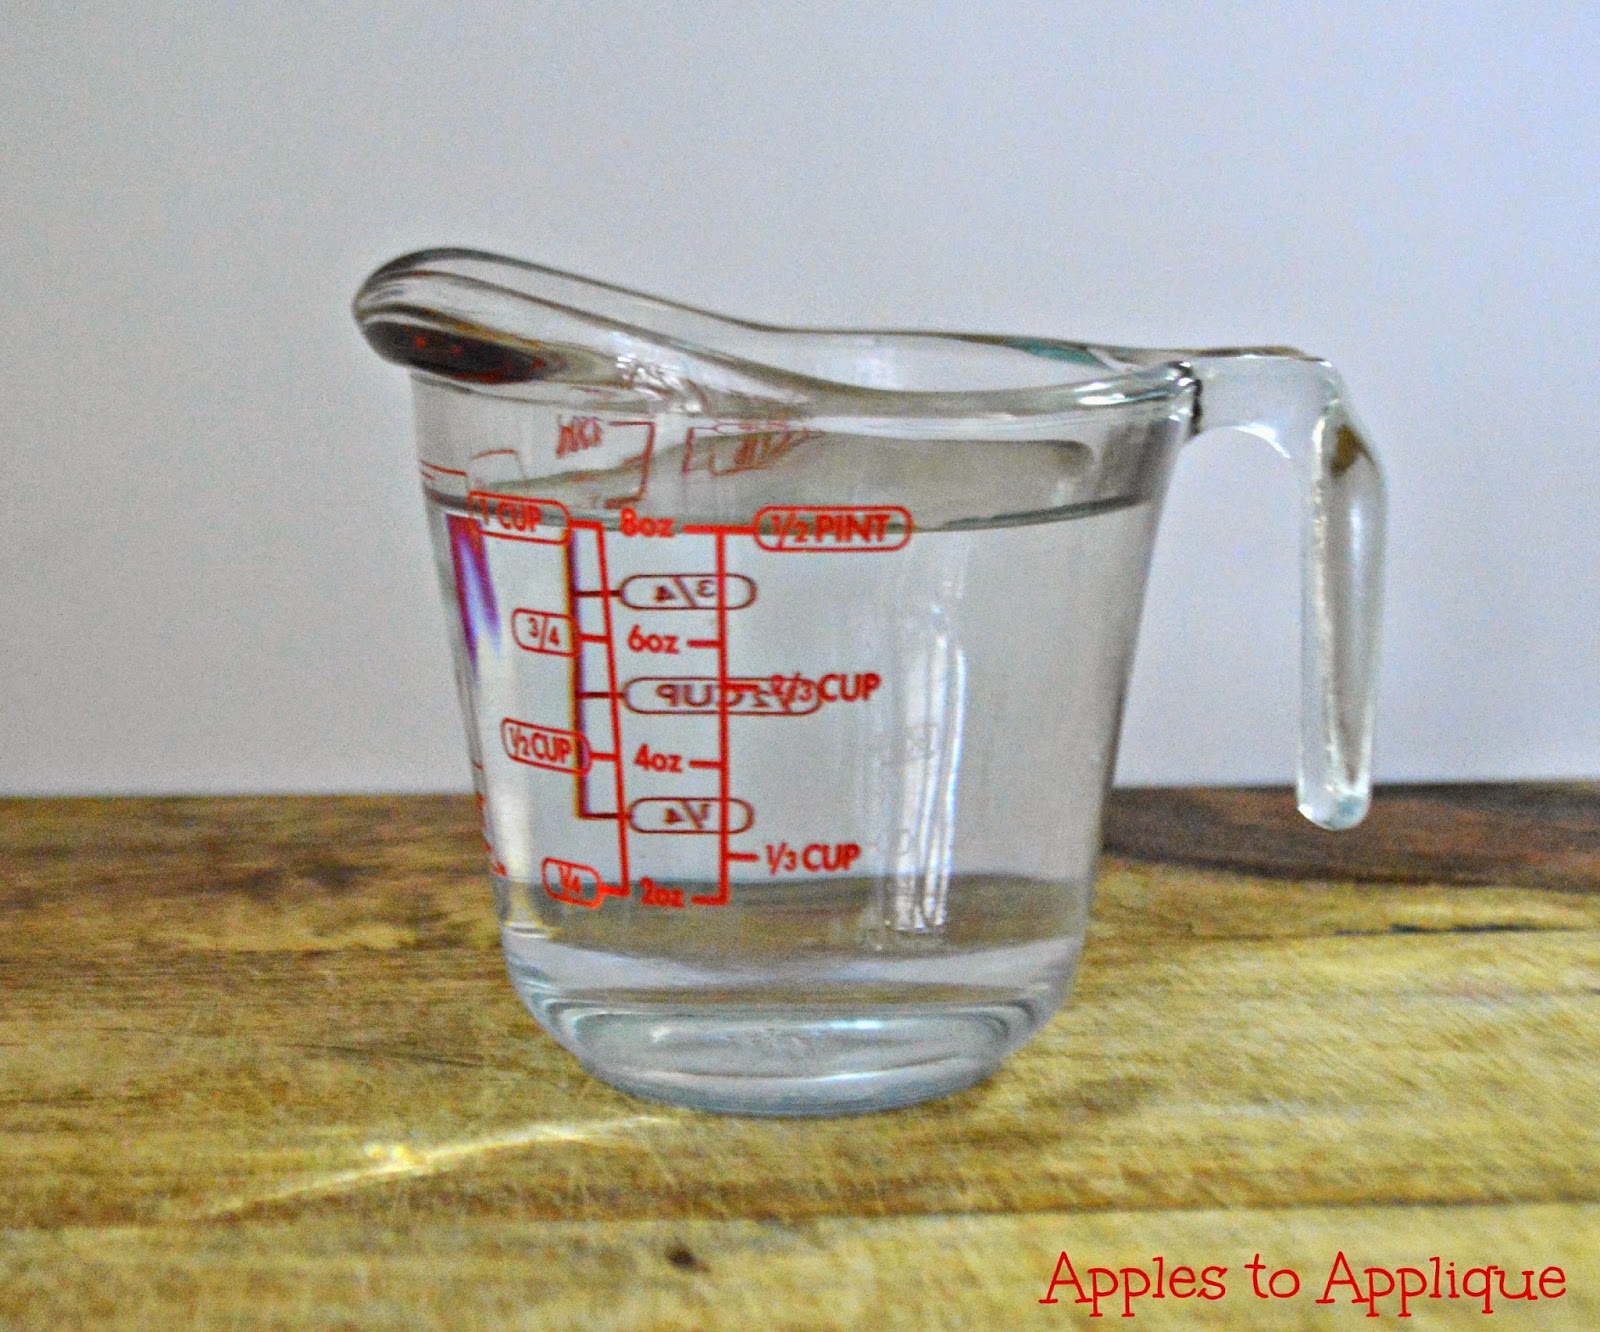 Cooking 101: How to Measure Ingredients for Cooking | Apples to Applique